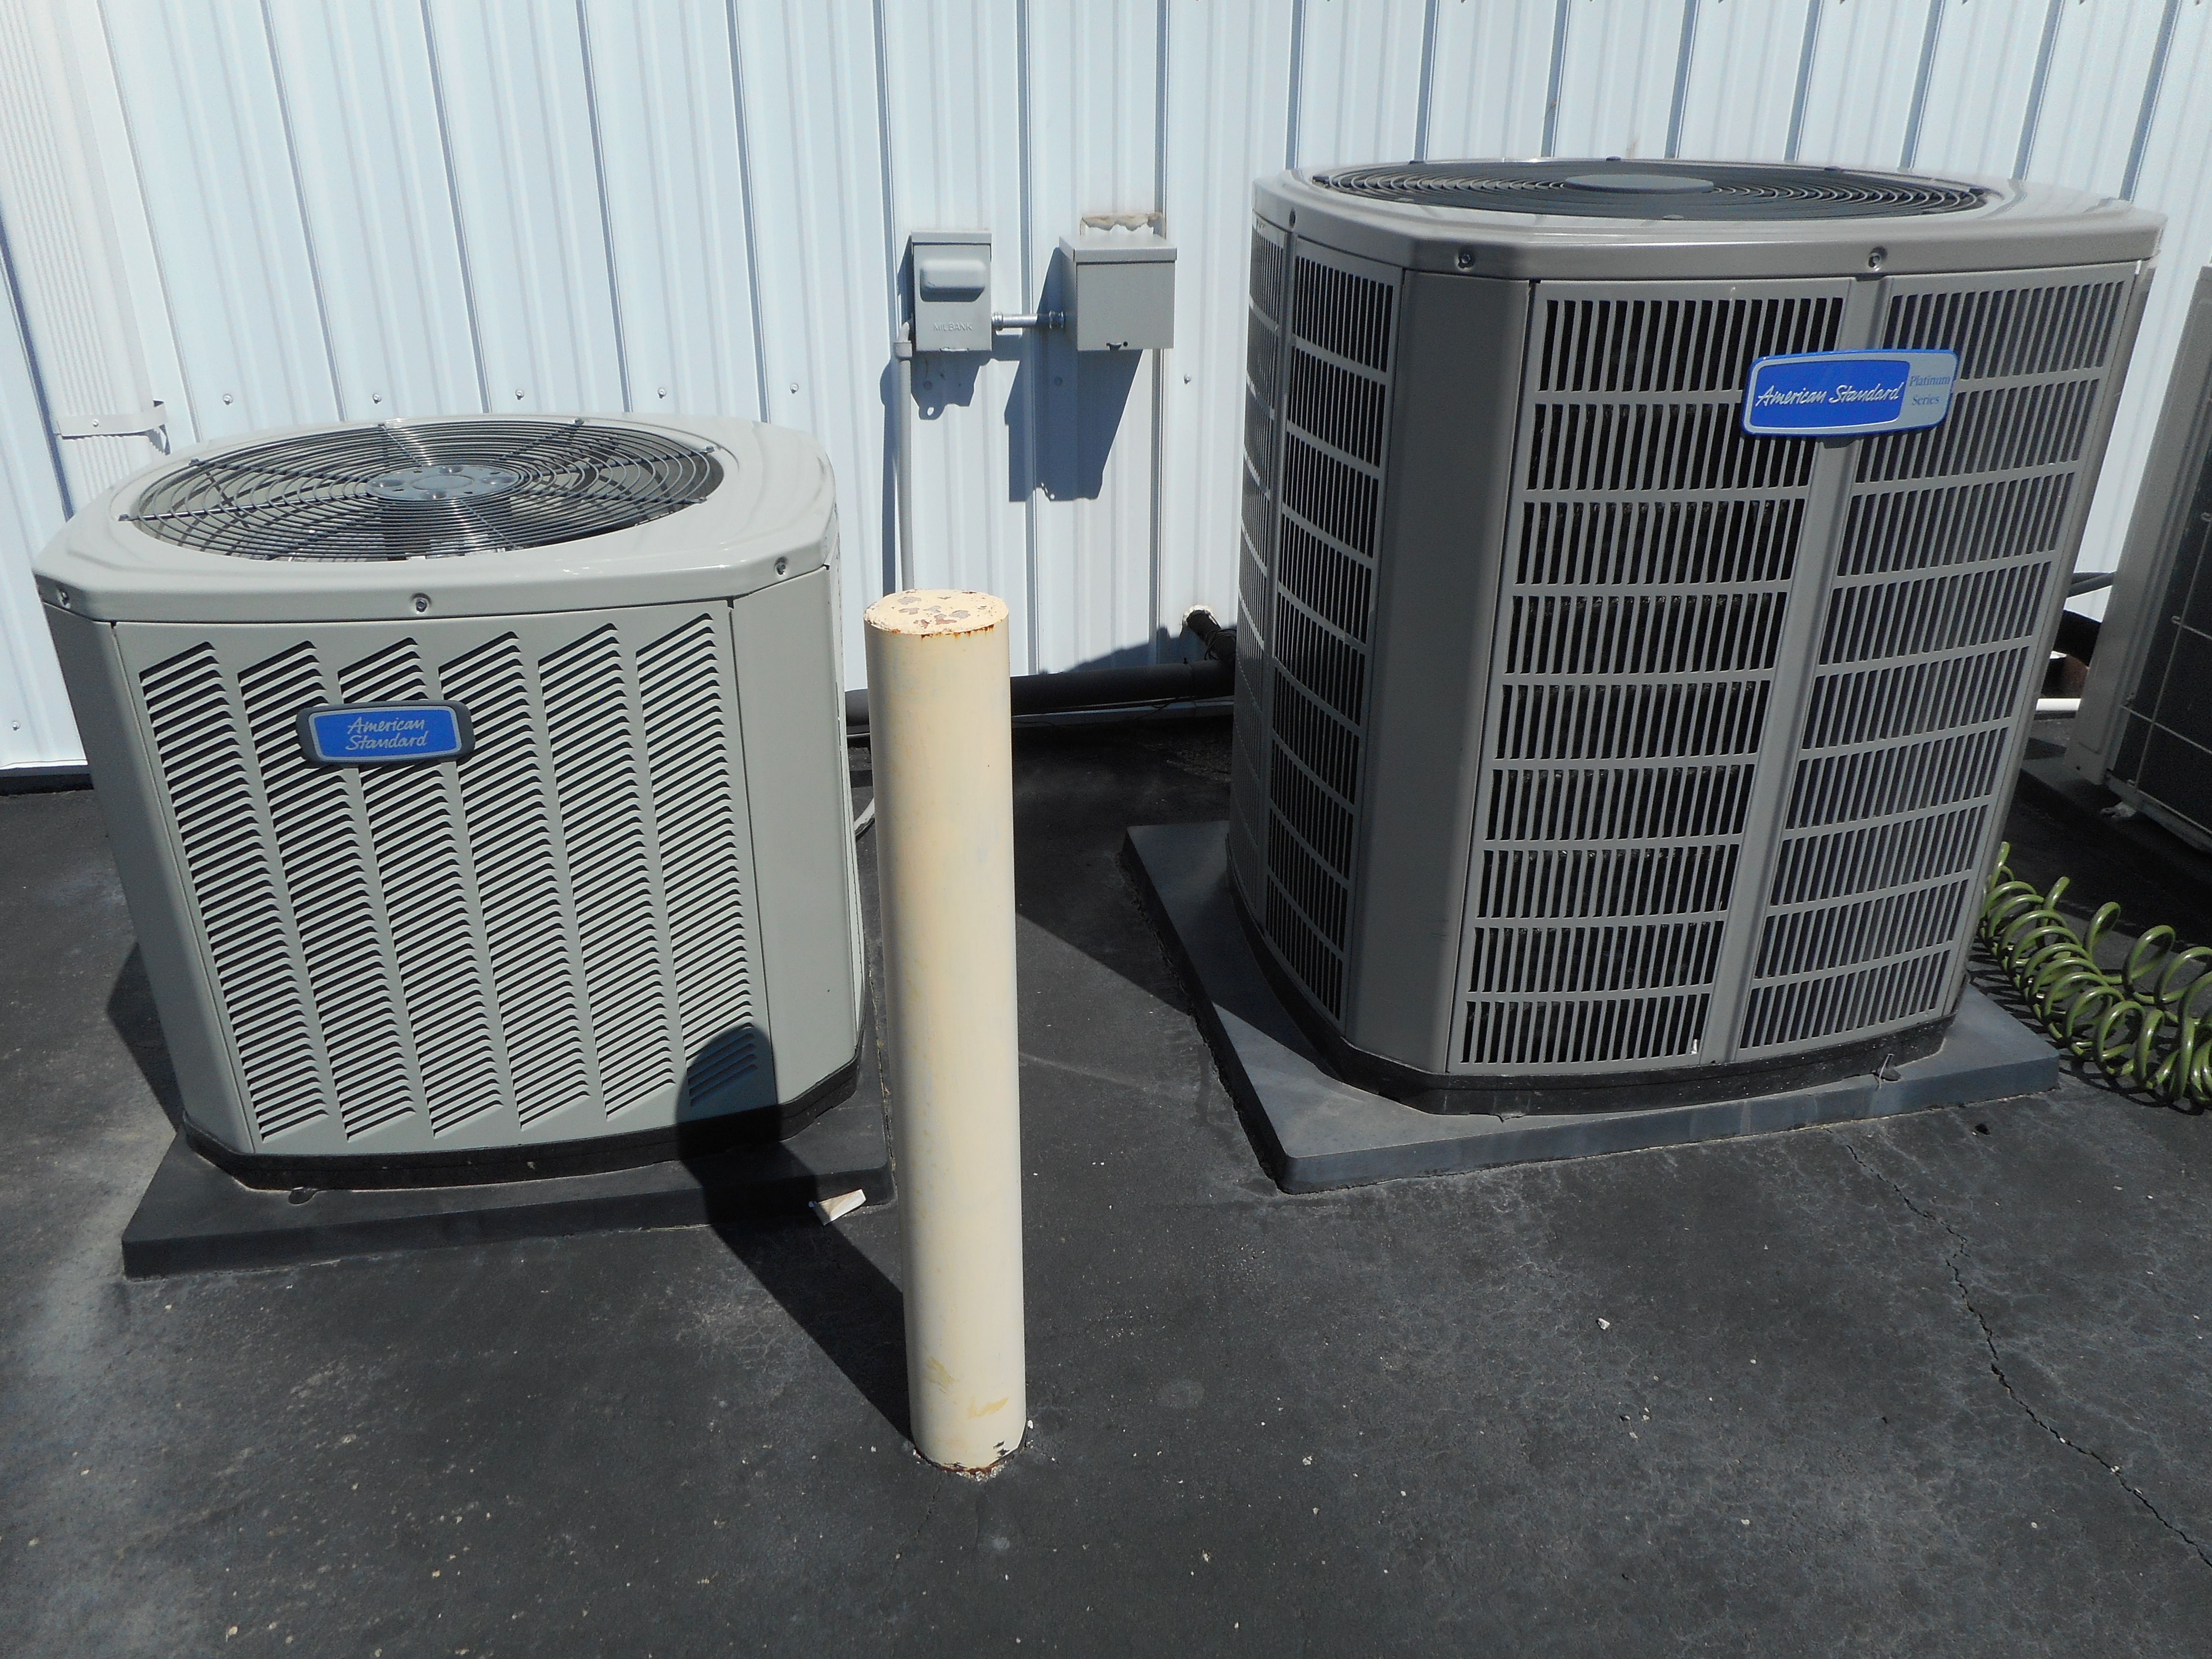 Not sure where to start when in need of a new AC unit? Read on to learn 3 key factors when choosing a replacement unit.